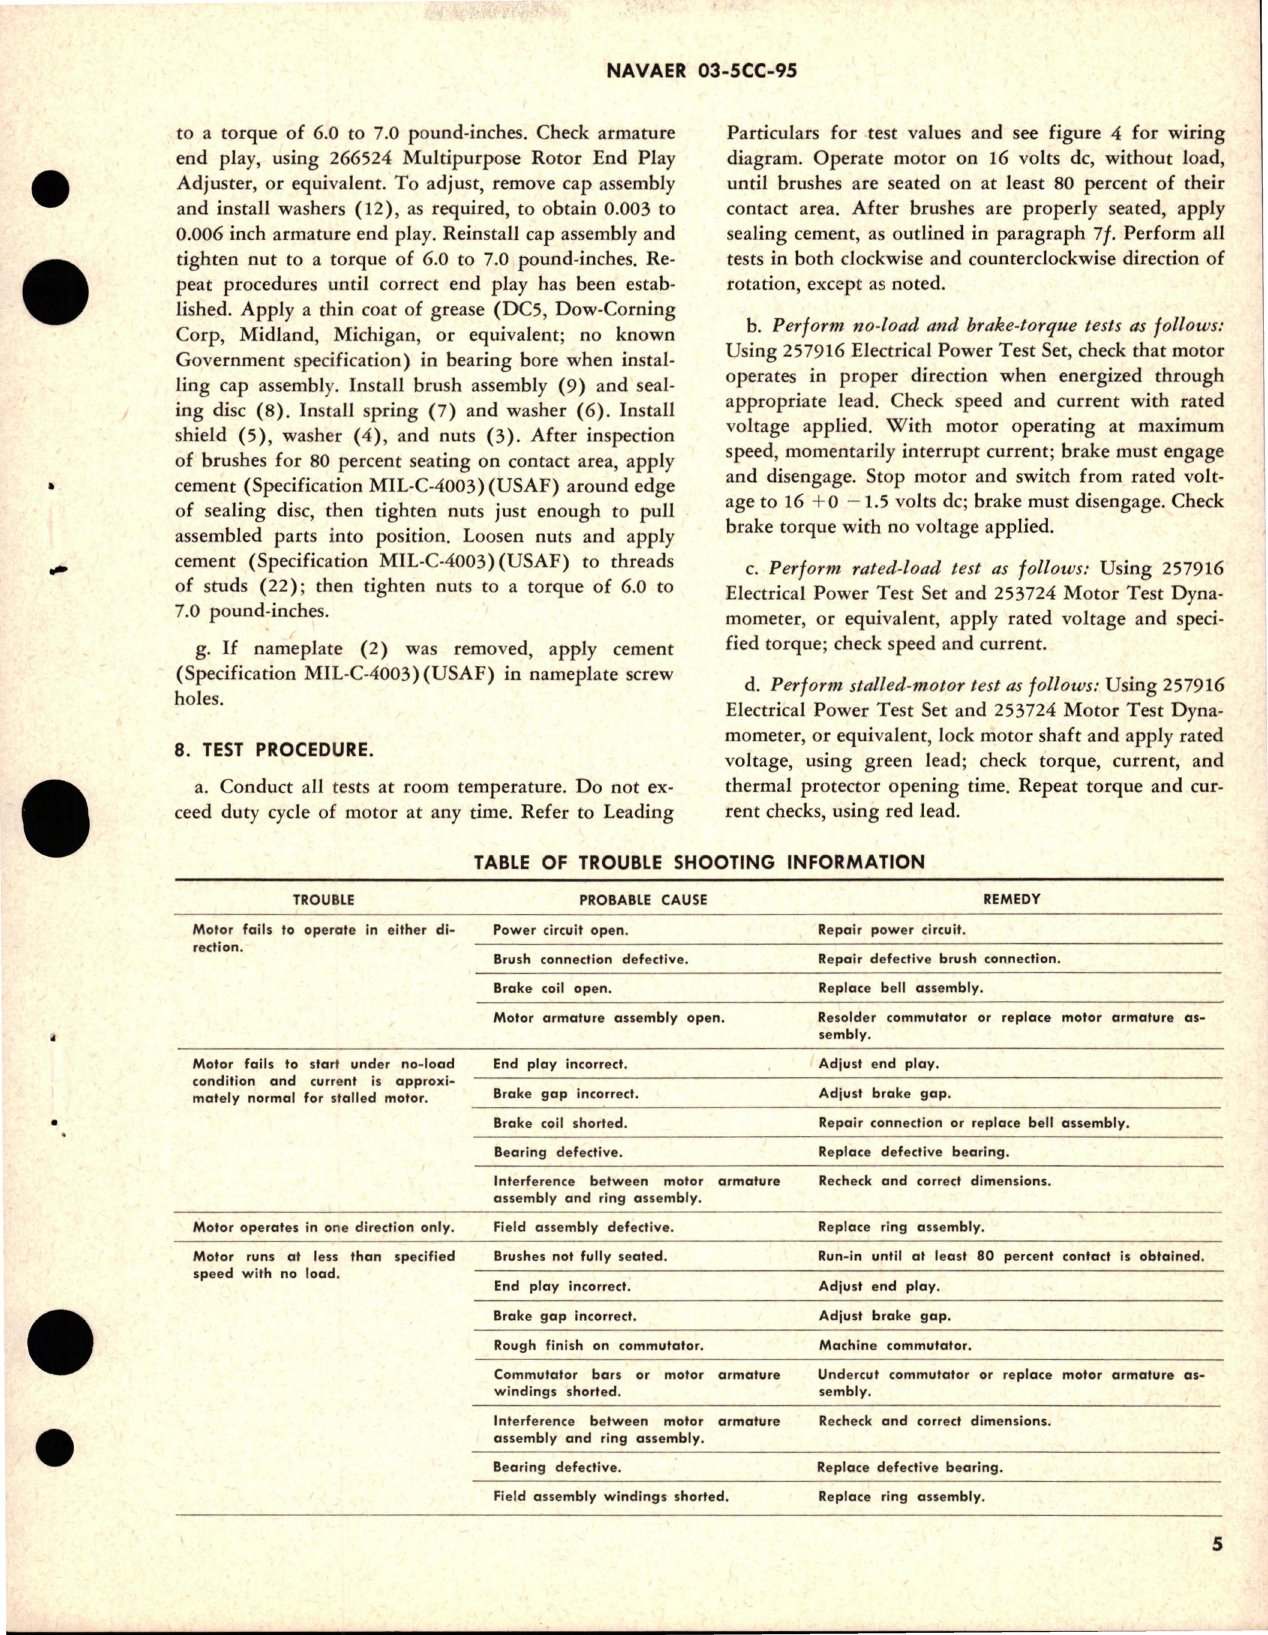 Sample page 5 from AirCorps Library document: Overhaul Instructions with Parts Breakdown for Pinion Shaft Direct-Current Motor 0.04 HP - Part 26675-4 - Model DCM15-8